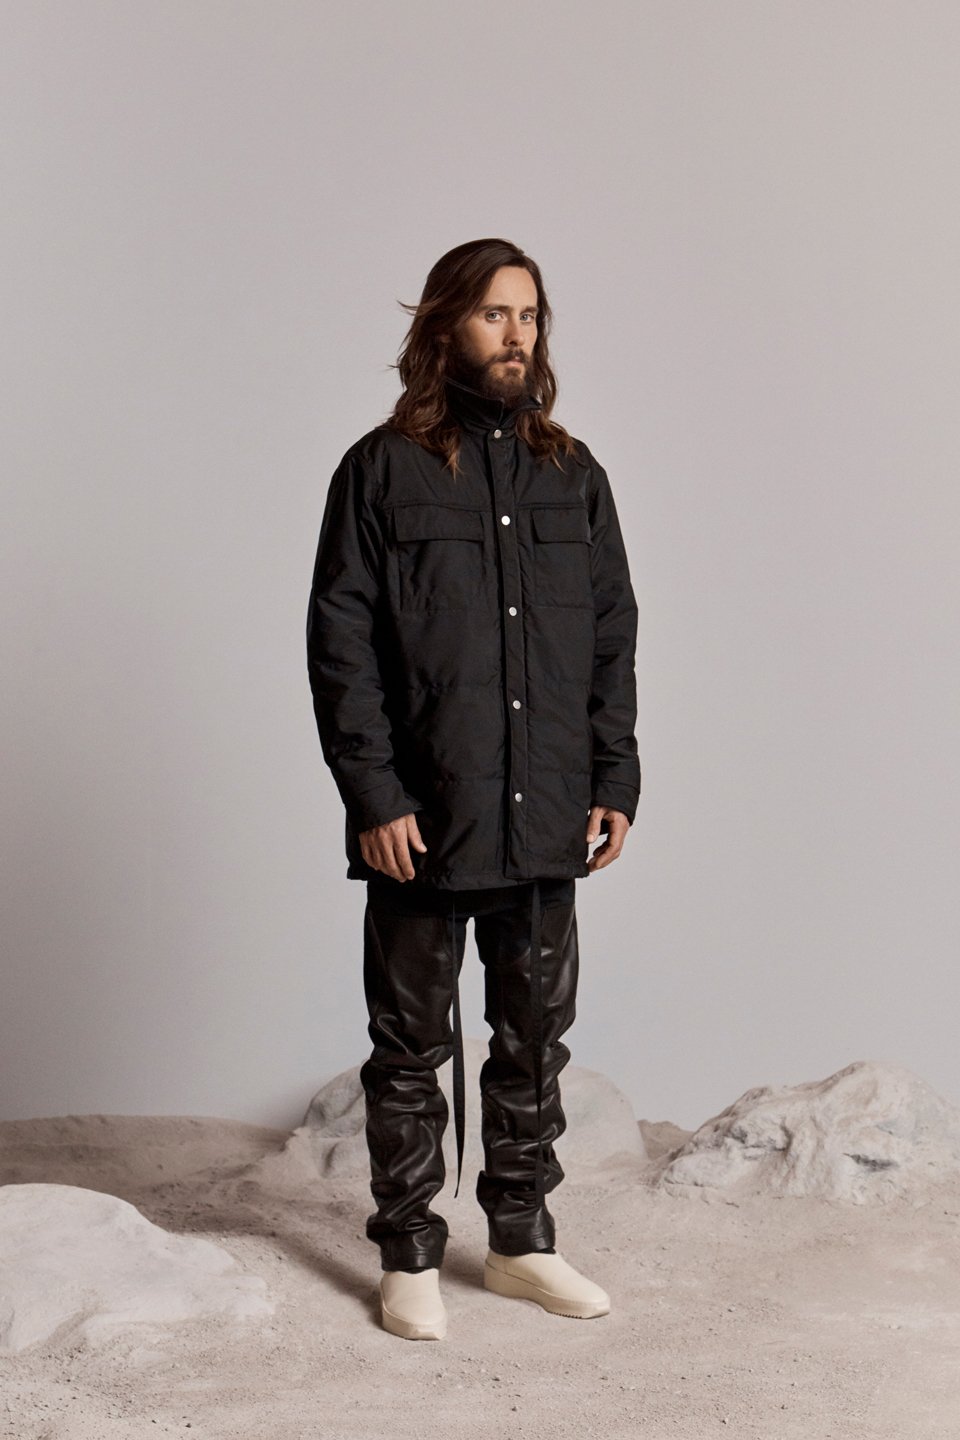 Fear of God Debuts Sixth Collection Lookbook Featuring Jared